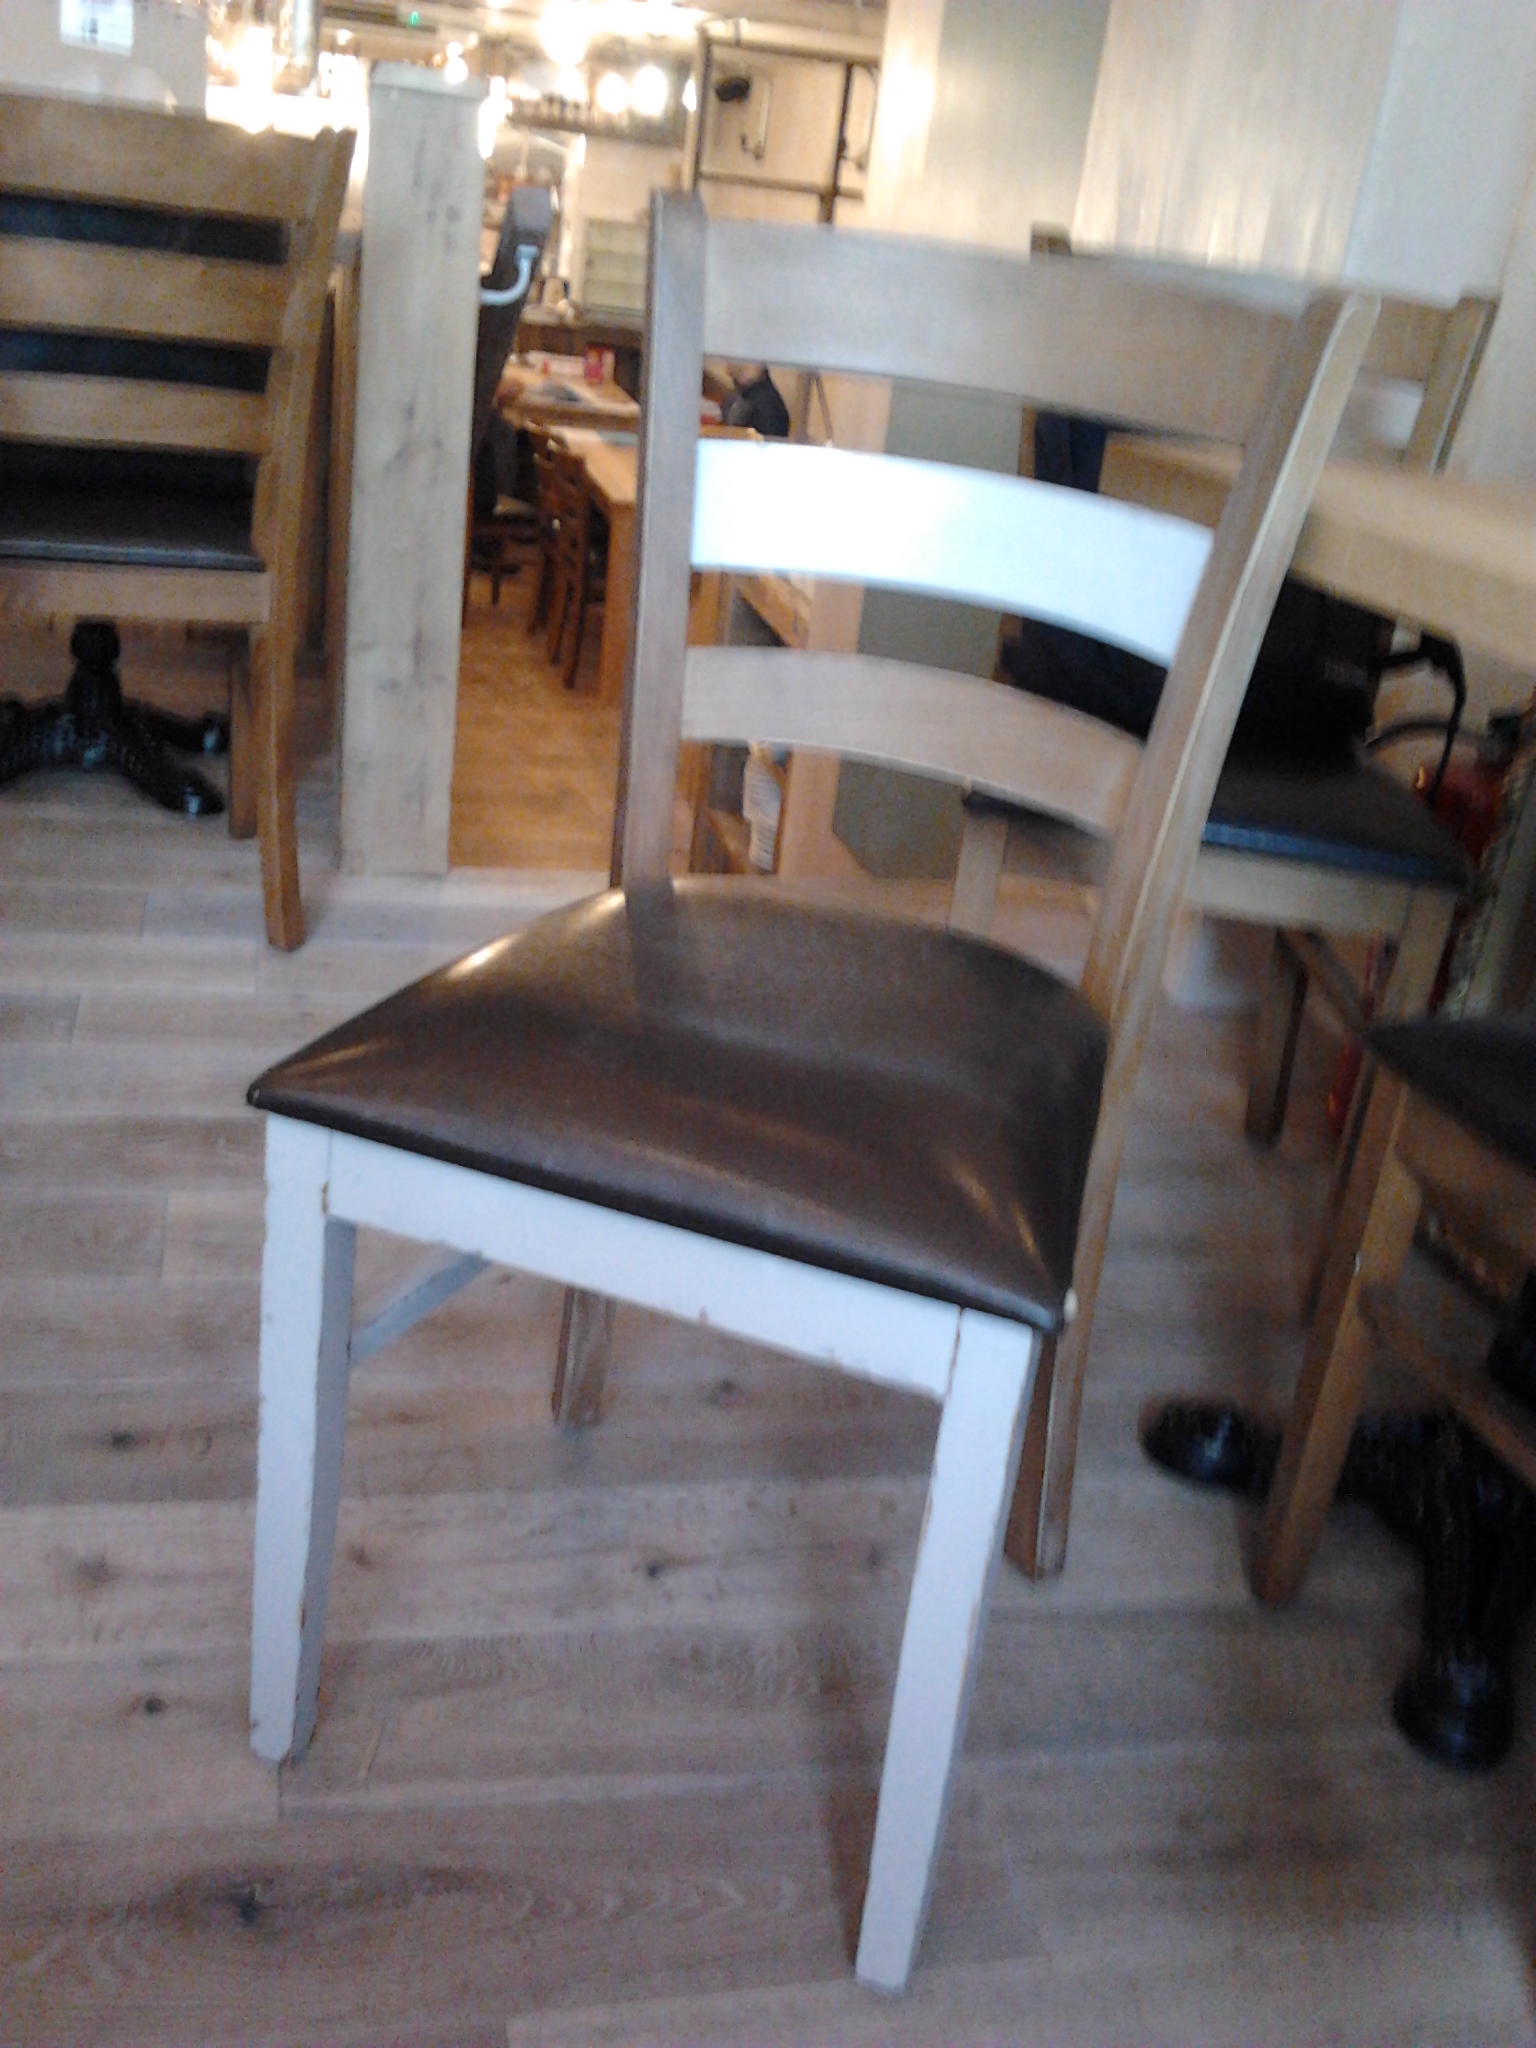  - cute-cappuccino-chairs-at-251-kings-road-ngs